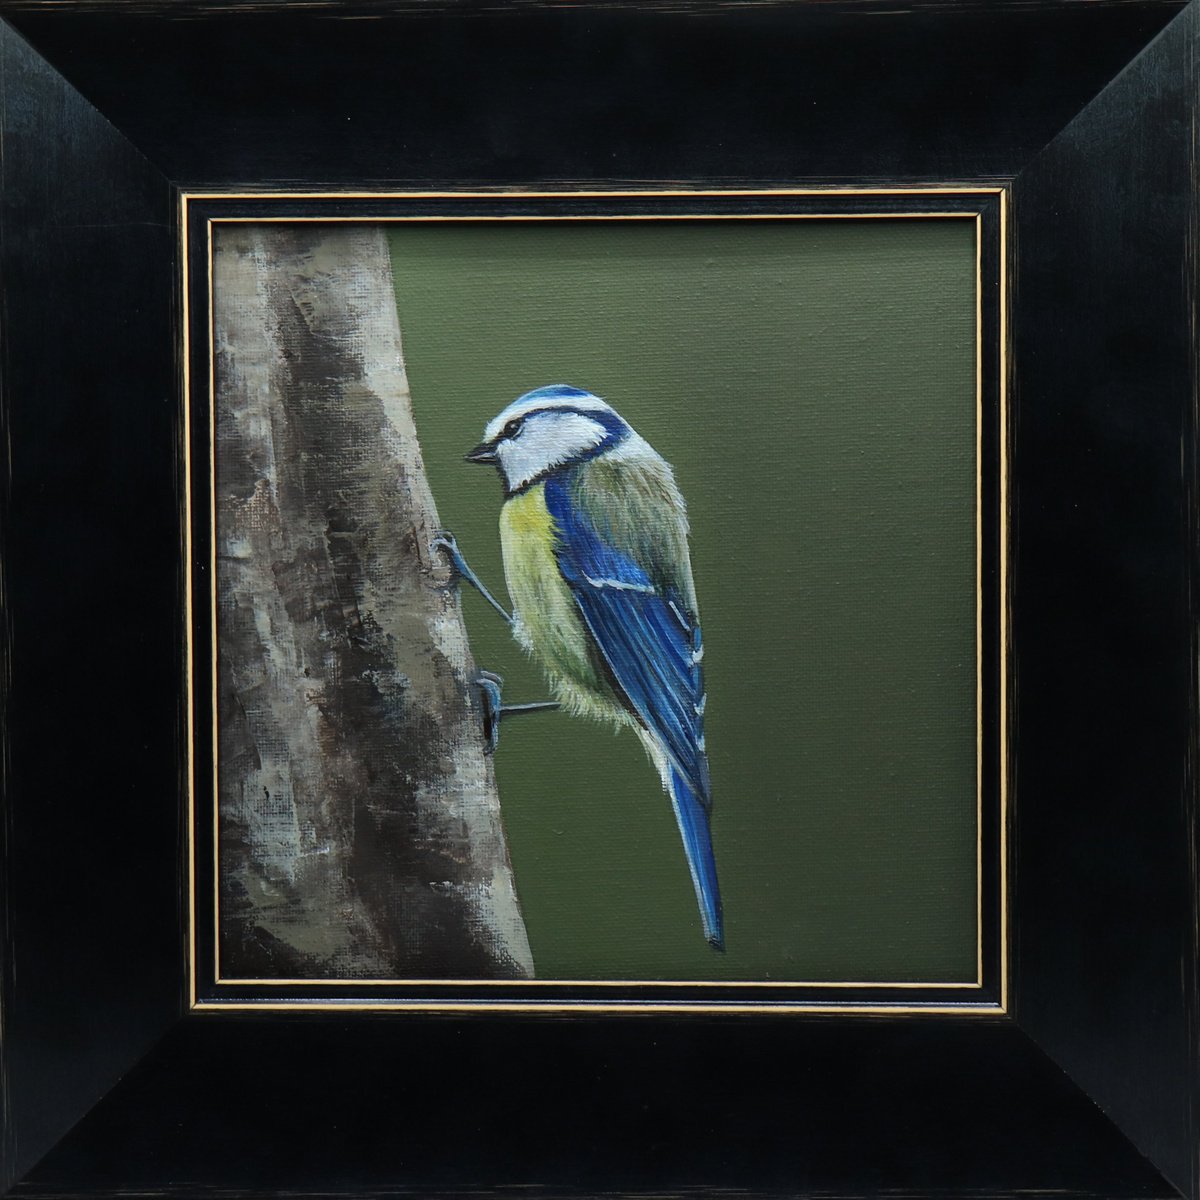 Blue Tit Clinging to Tree by Alex Jabore